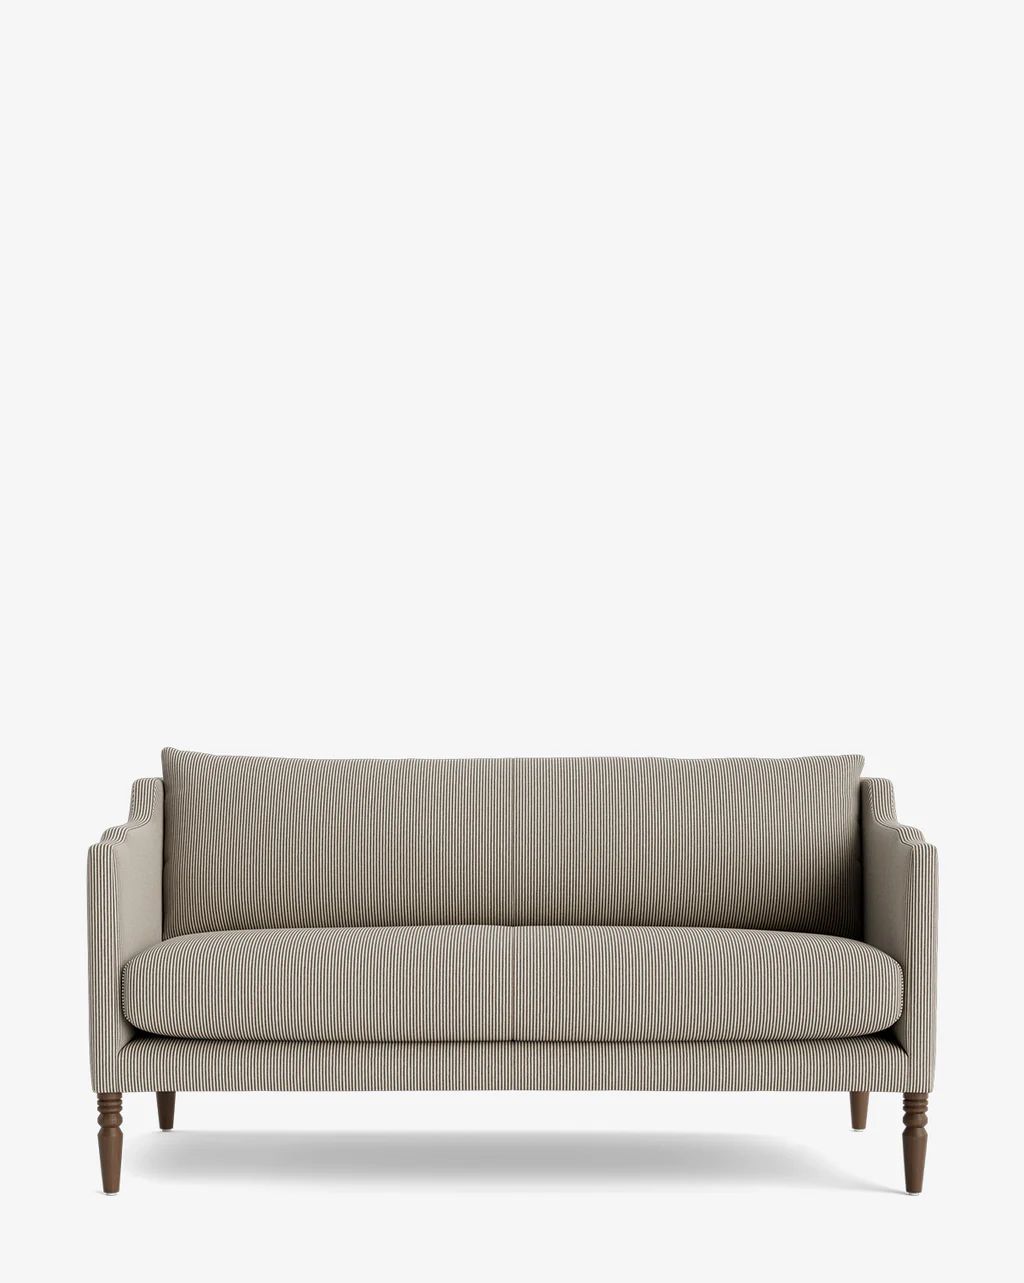 Gemma Settee (Ready to Ship) | McGee & Co.